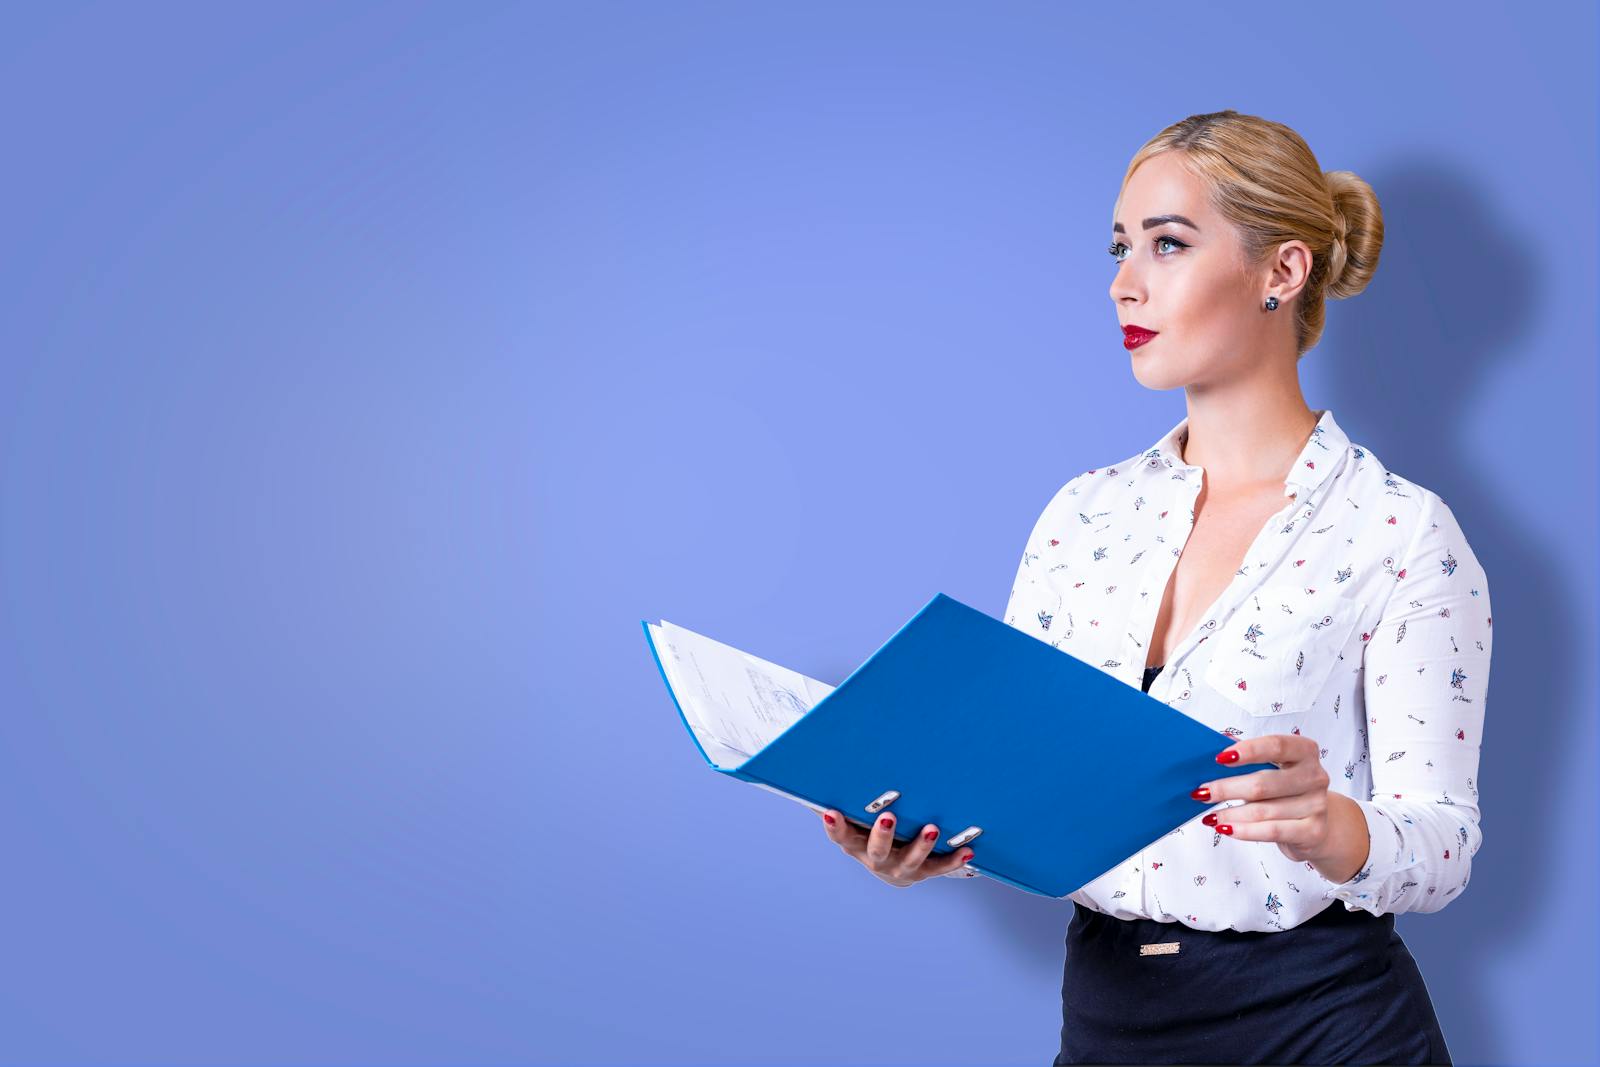 Blond Woman Wearing Red Lipstick Posing with Blue Folder against Blue Wall